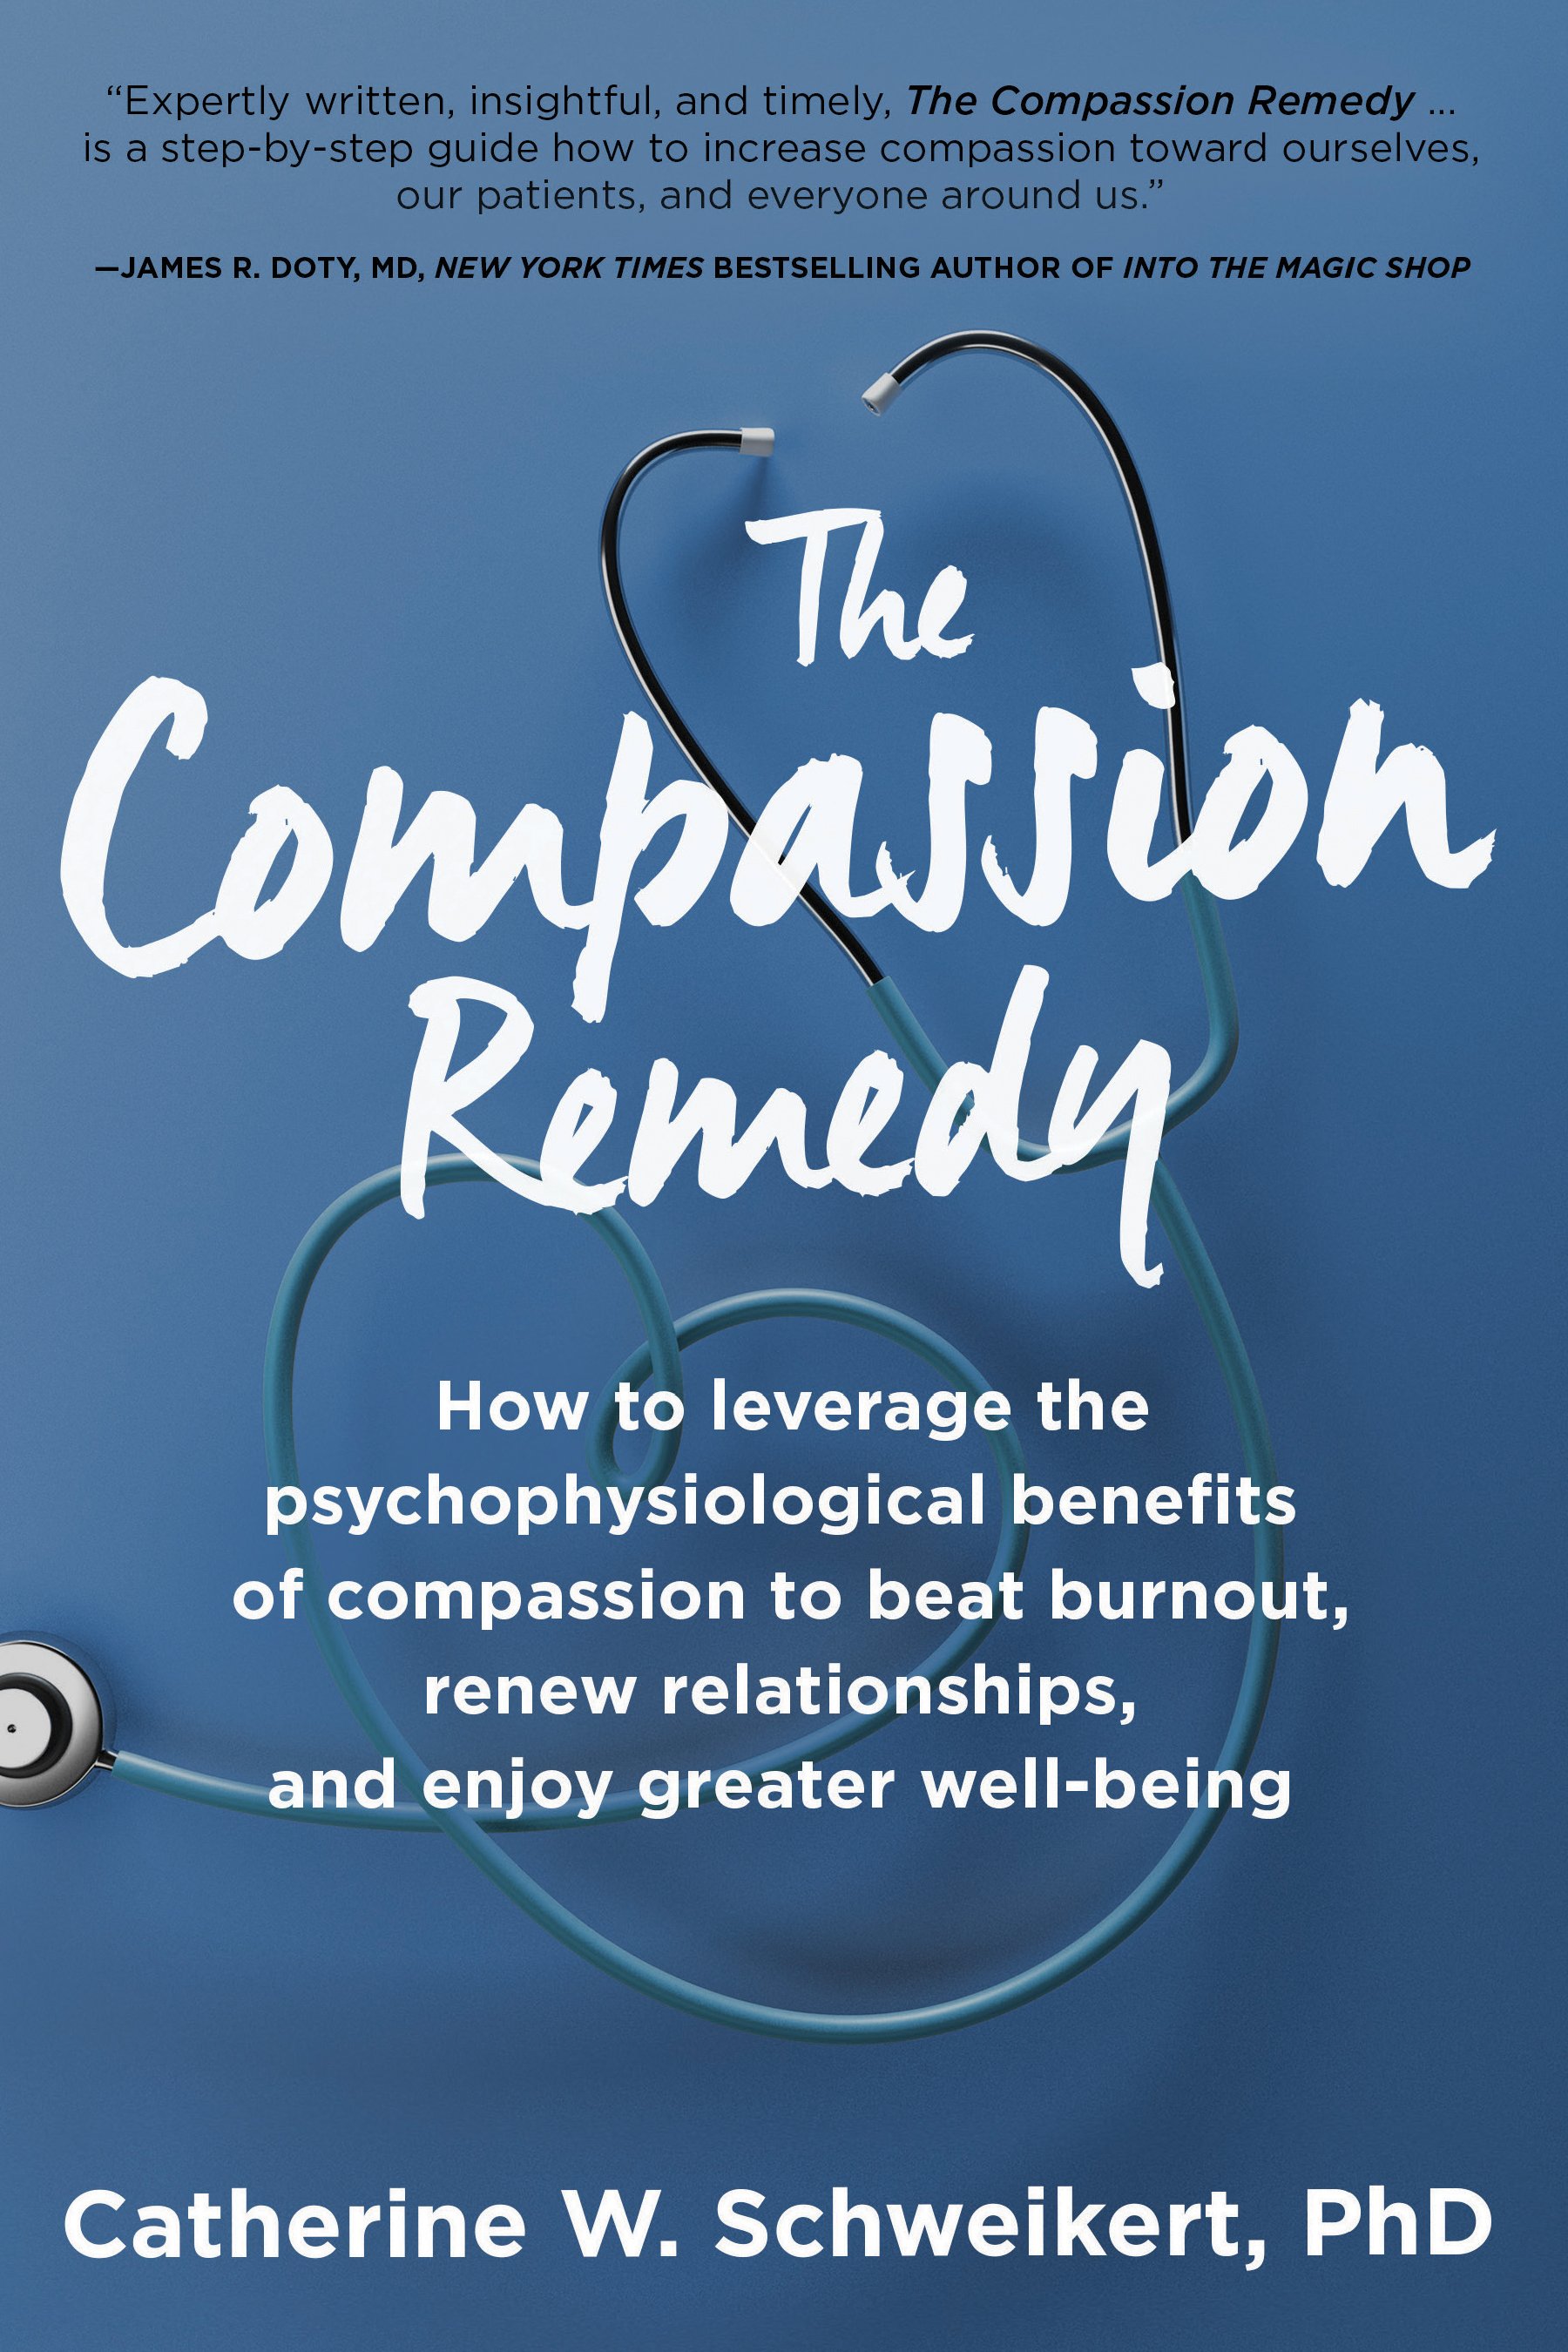 The Compassion Remedy_Ebook_8-8-23.jpg